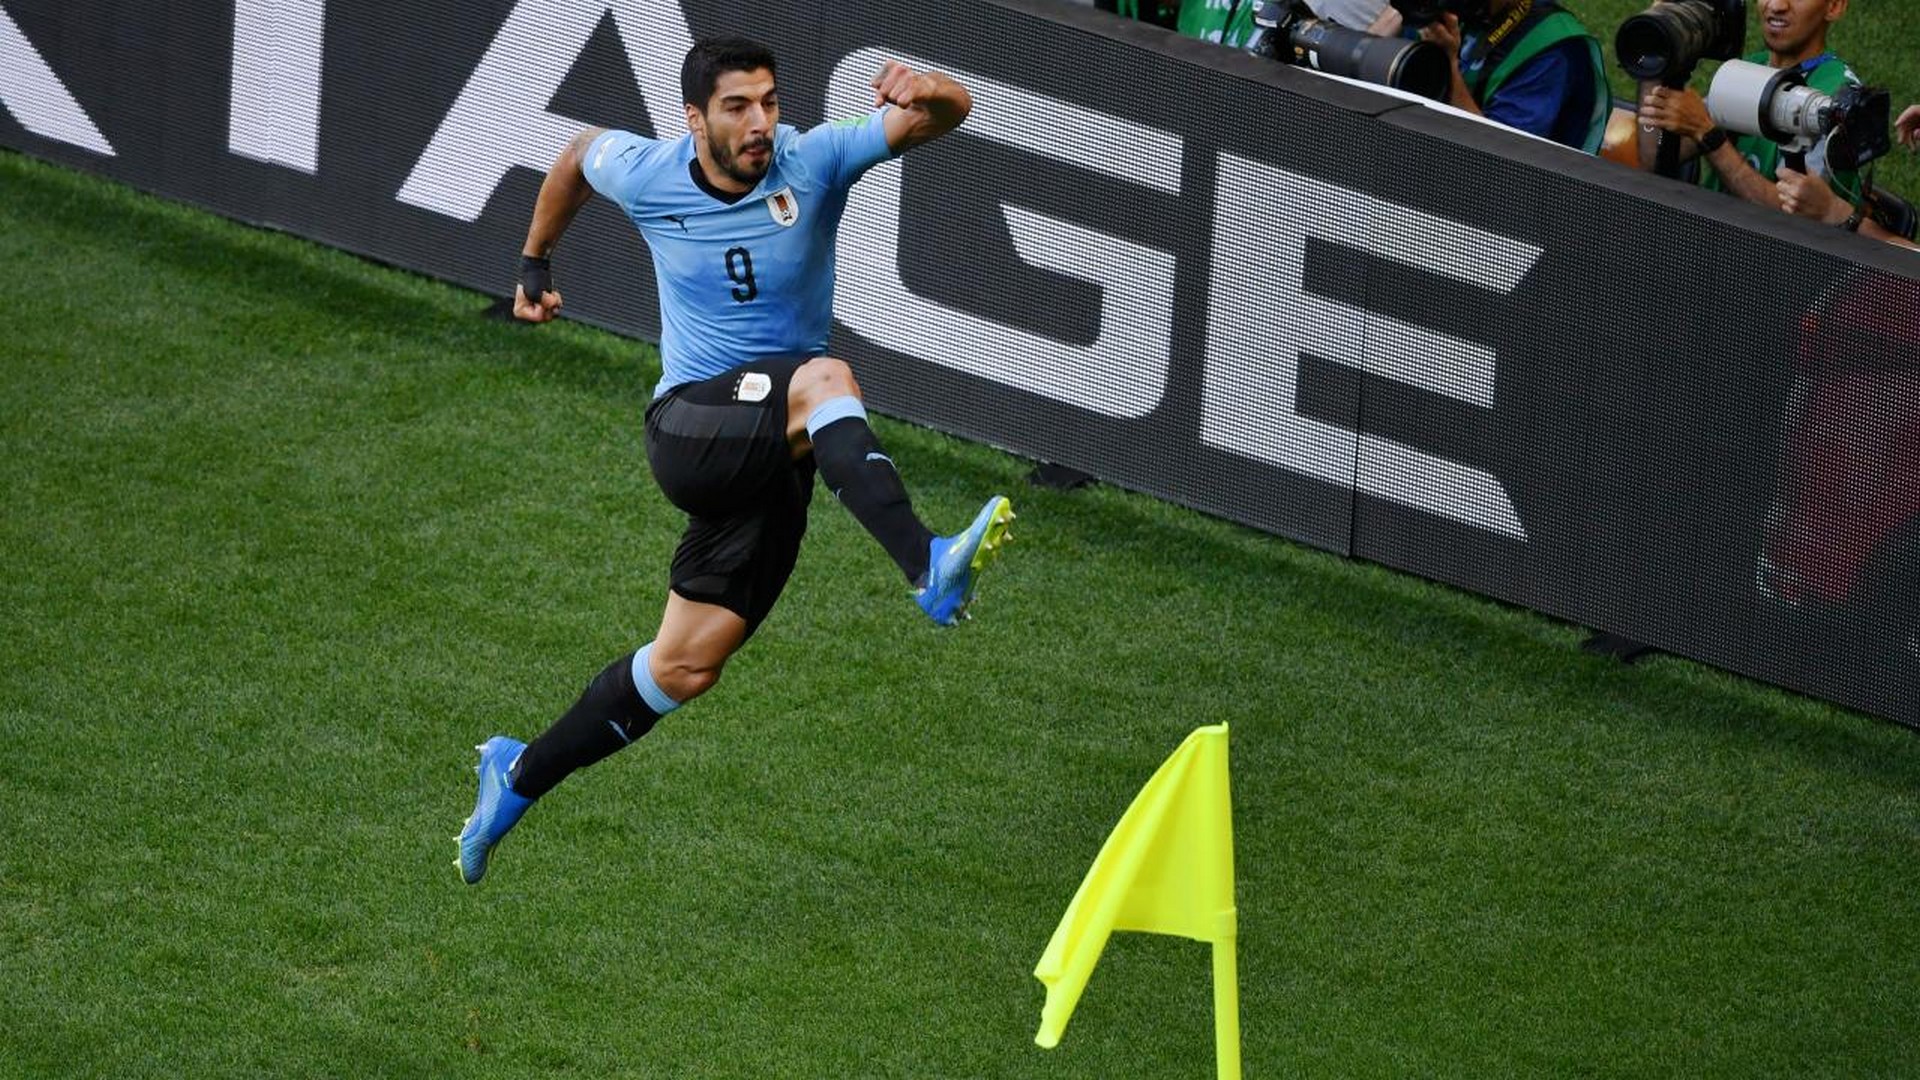 Luis Suarez Uruguay Wallpaper HD with image resolution 1920x1080 pixel. You can make this wallpaper for your Desktop Computer Backgrounds, Mac Wallpapers, Android Lock screen or iPhone Screensavers